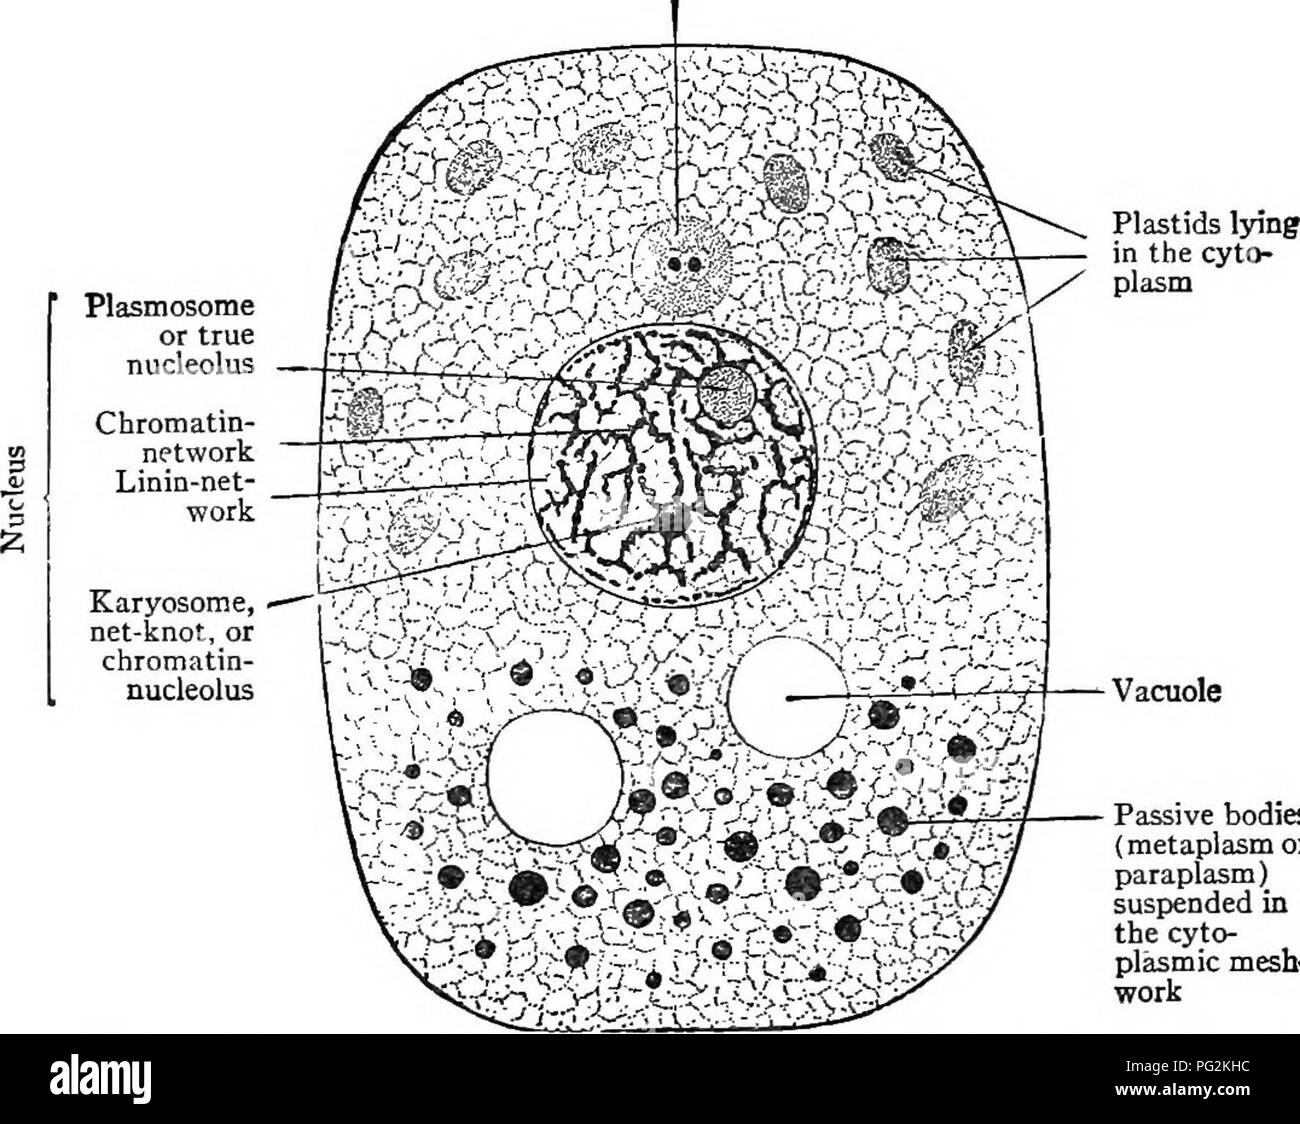 . Pharmaceutical botany. Botany; Botany, Medical. PROTOPLASMIC CELL CONTENTS 3 A cell is a mass of protoplasm containing a nucleus. Protoplasm is the more or less semi-fluid, viscid, foamy, and granu- lar substance in which life resides. It is the &quot;physical basis of life.&quot; Vegetable cells generally have cell walls of cellulose surrounding the living protoplasm of the cell (protoplast). Cells divide to form tissues. Protoplasmic Cell Contents Protoplasm consists of four well-differentiated portions: (a) Cytoplasm, or the foamy, often granular matrix of protoplasm outside of the nucleu Stock Photo